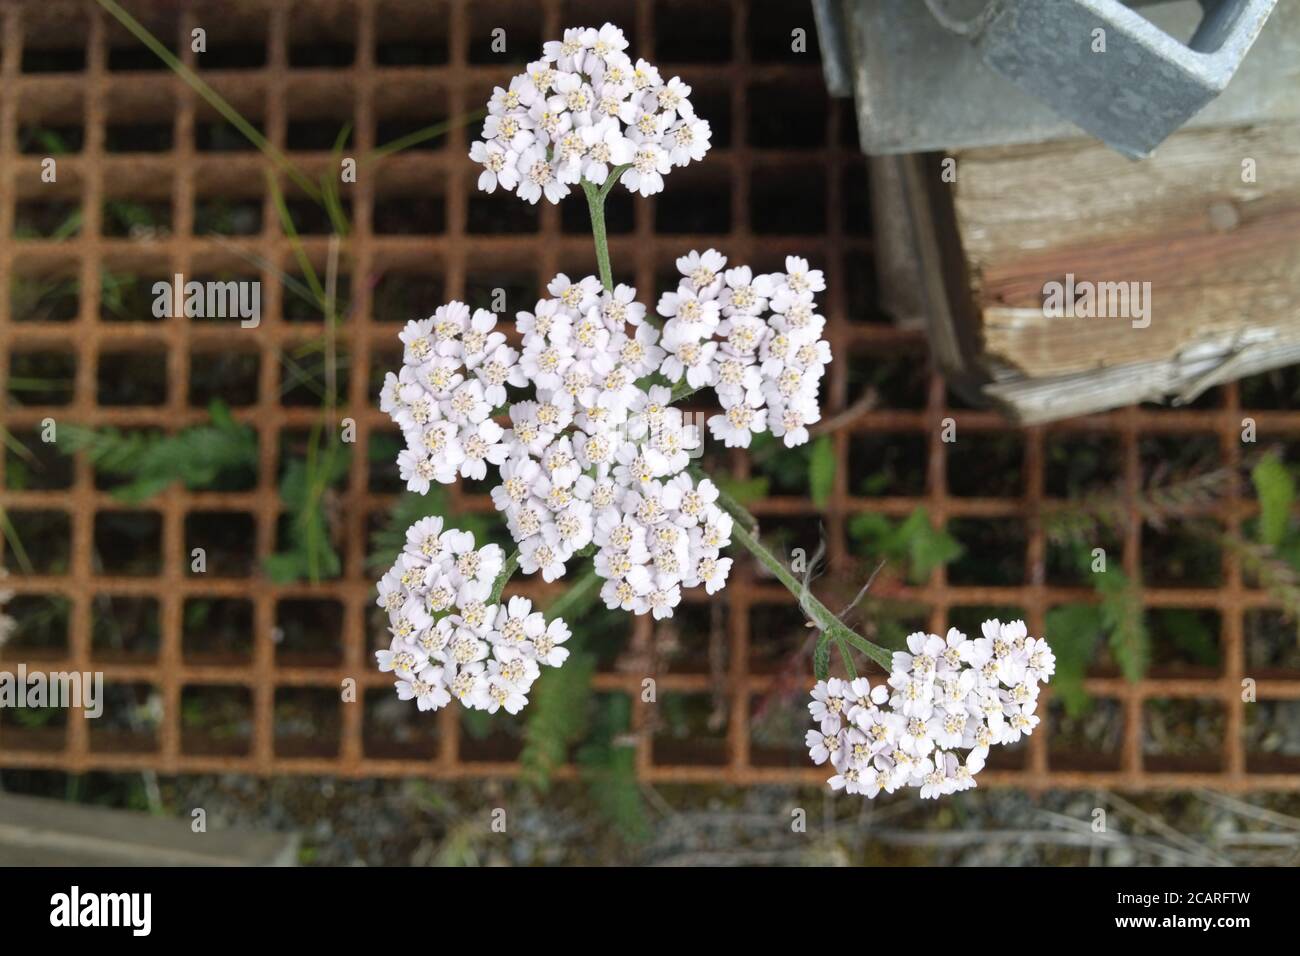 Achillea Nobilis or Yarrow flower plant with white flower heads growing from the ground through rusty metal square matrix in late summer or autumn. Stock Photo